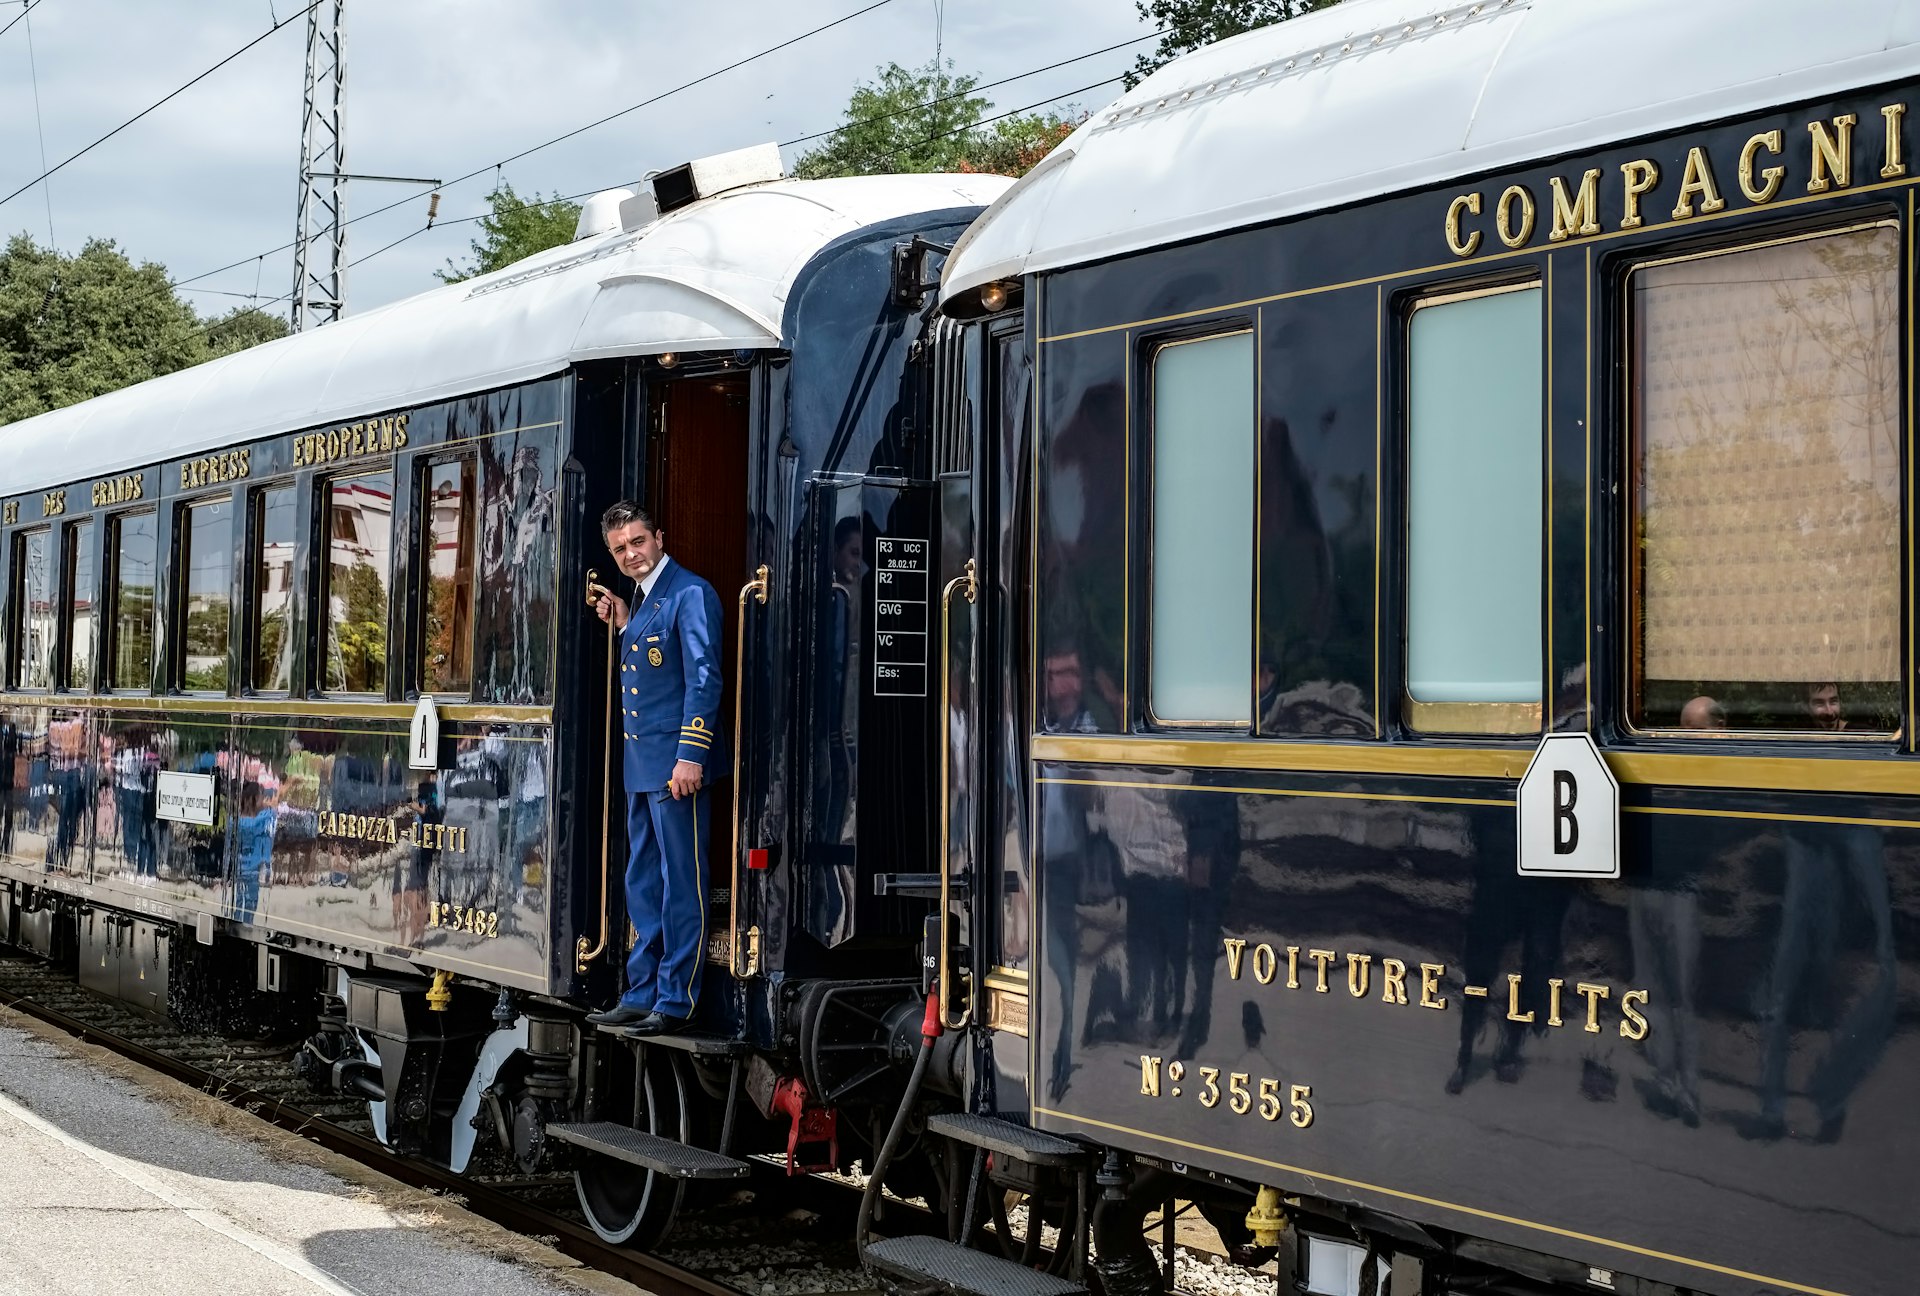 The legendary Venice Simplon Orient Express is ready to depart from Ruse Railway station, Bulgaria